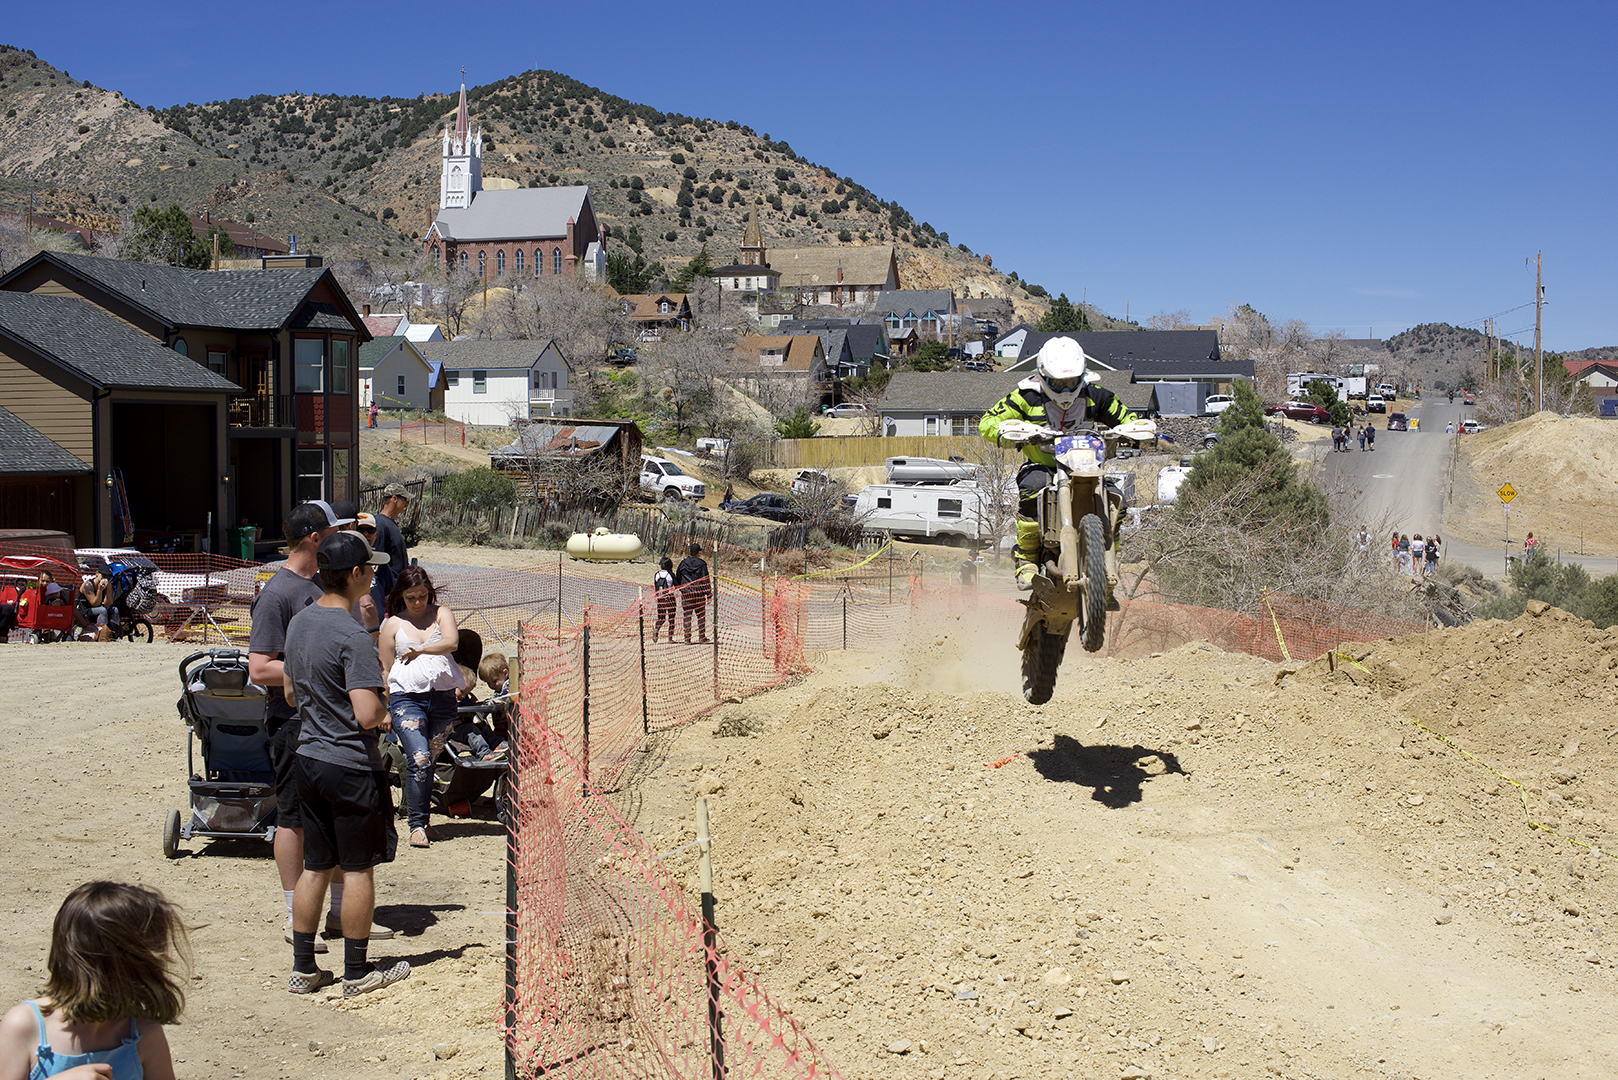  The course comes in to town in a couple places and spectators can get as close a look at the racing as they want to. Willy Heiss gets it going past the pits. 